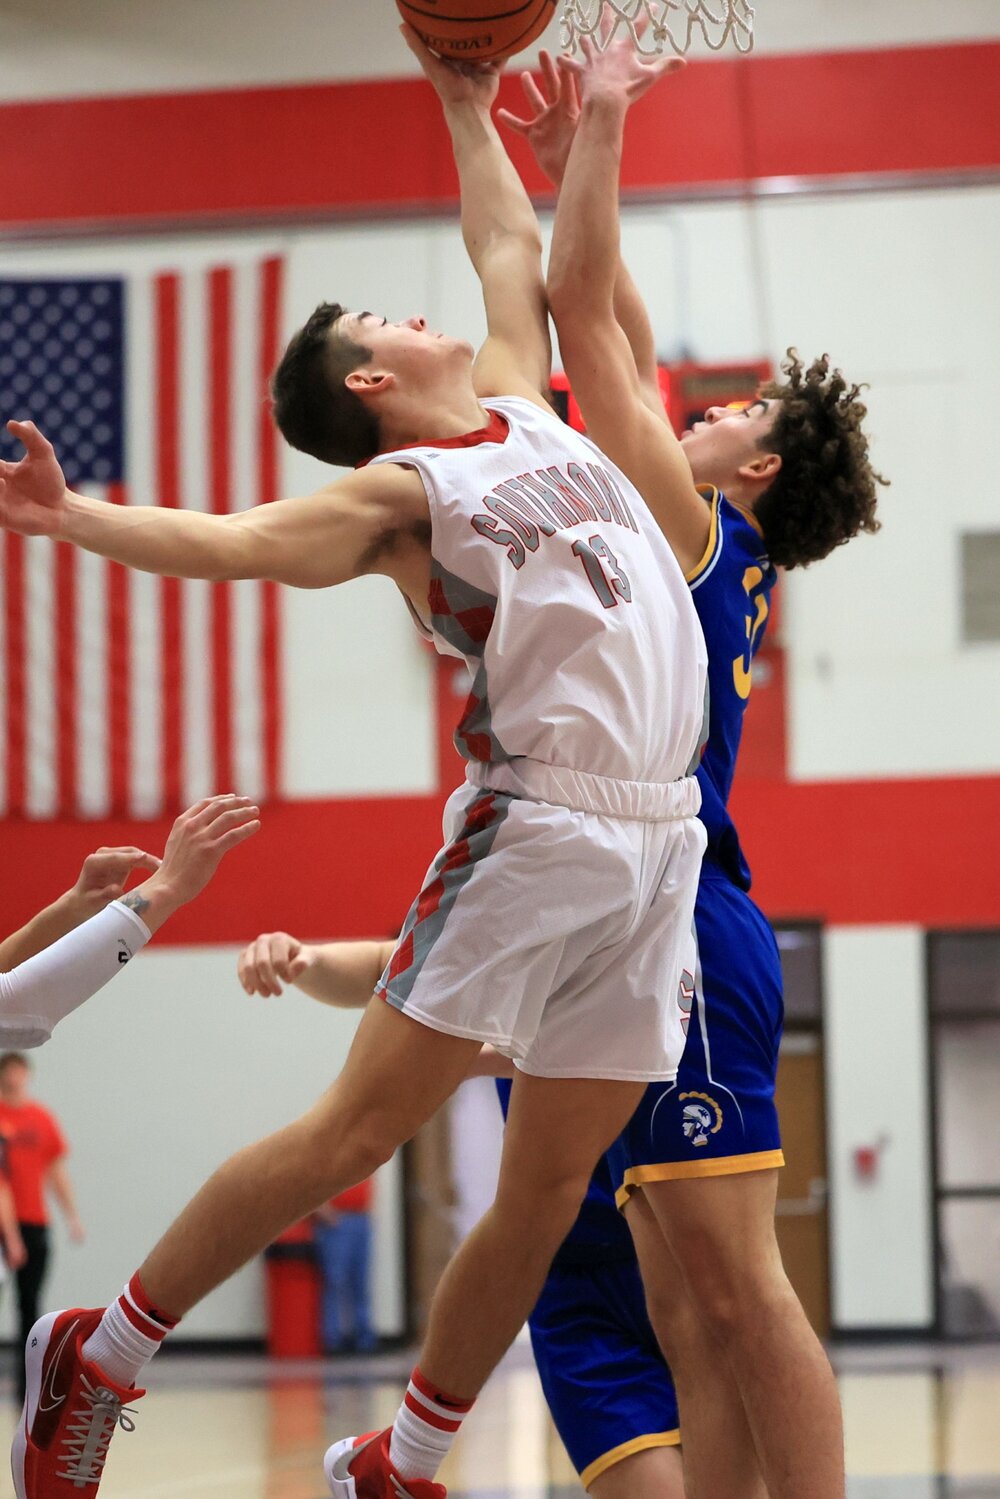 South's Lucas Oppy and Cville's Alec Saidian battle for a rebound.